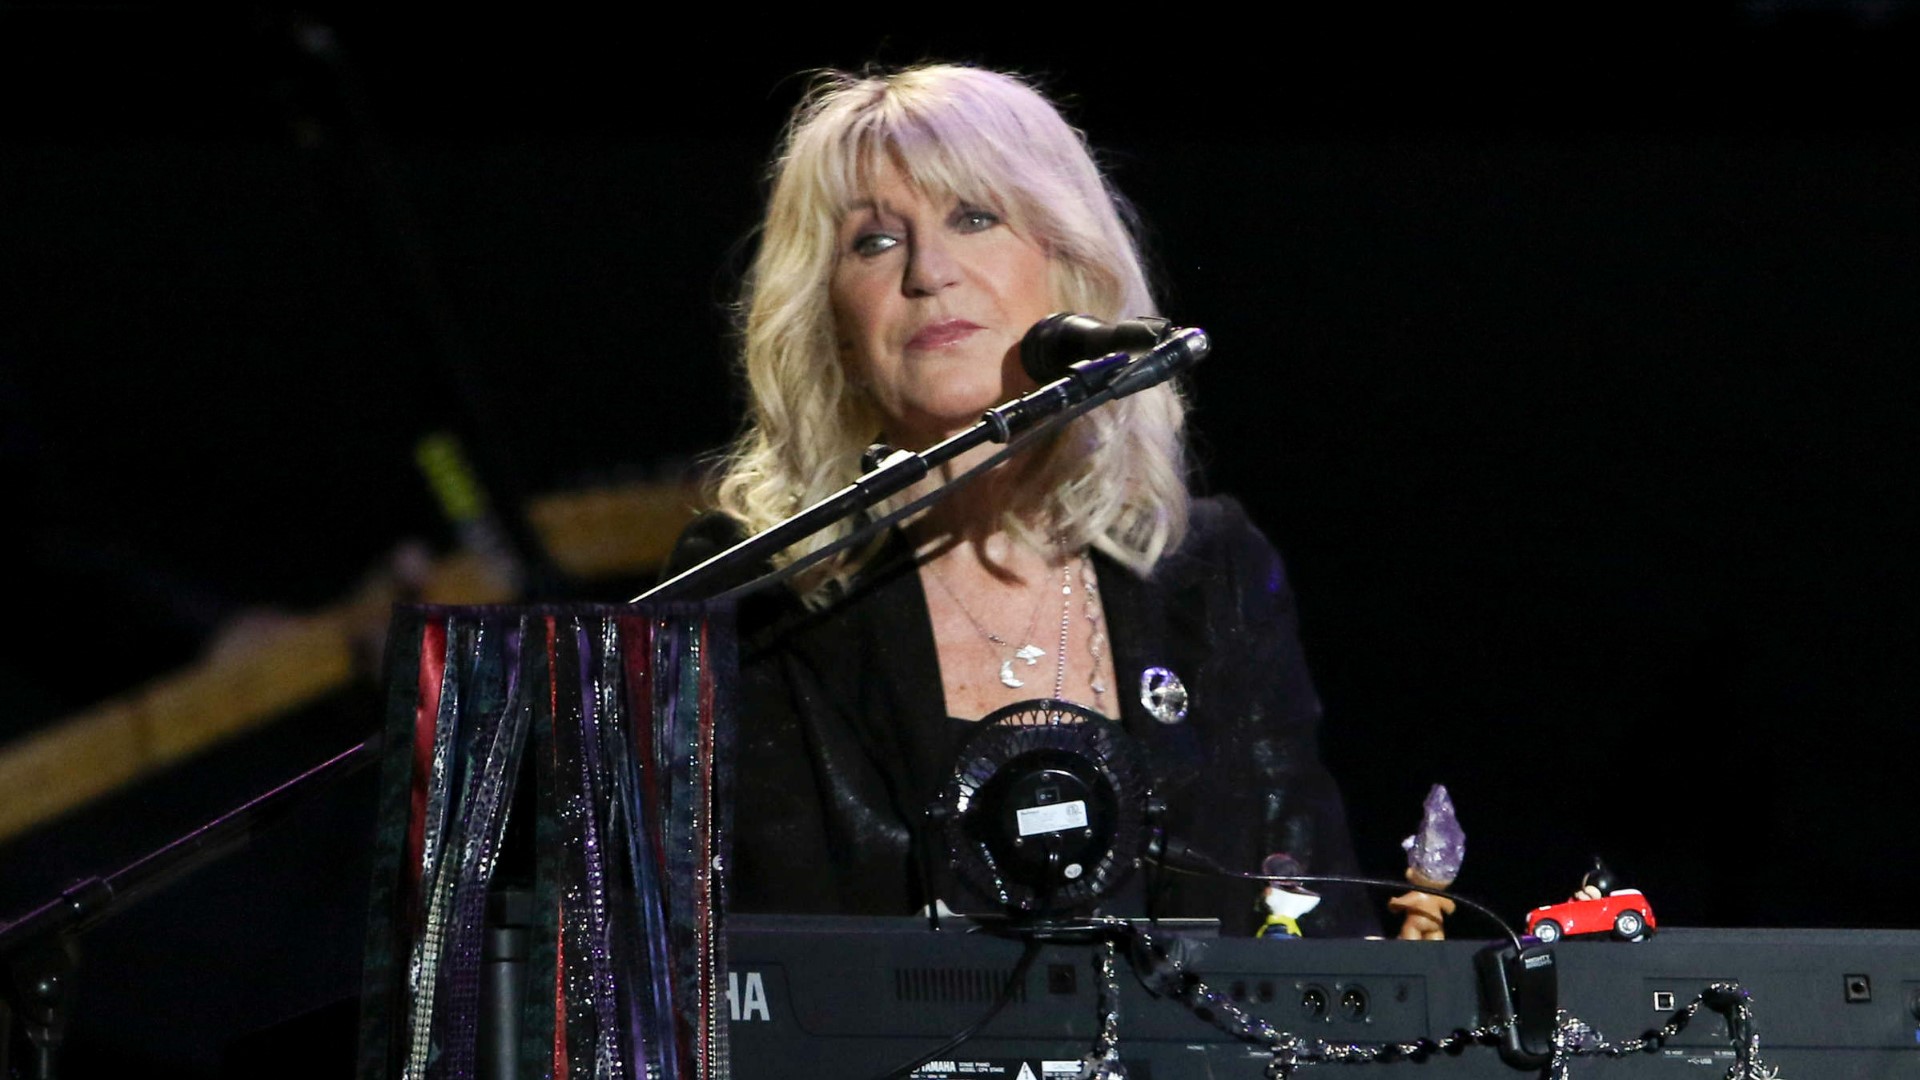 Christine McVie, the soulful British musician who sang lead on many of Fleetwood Mac’s biggest hits, has died at 79.